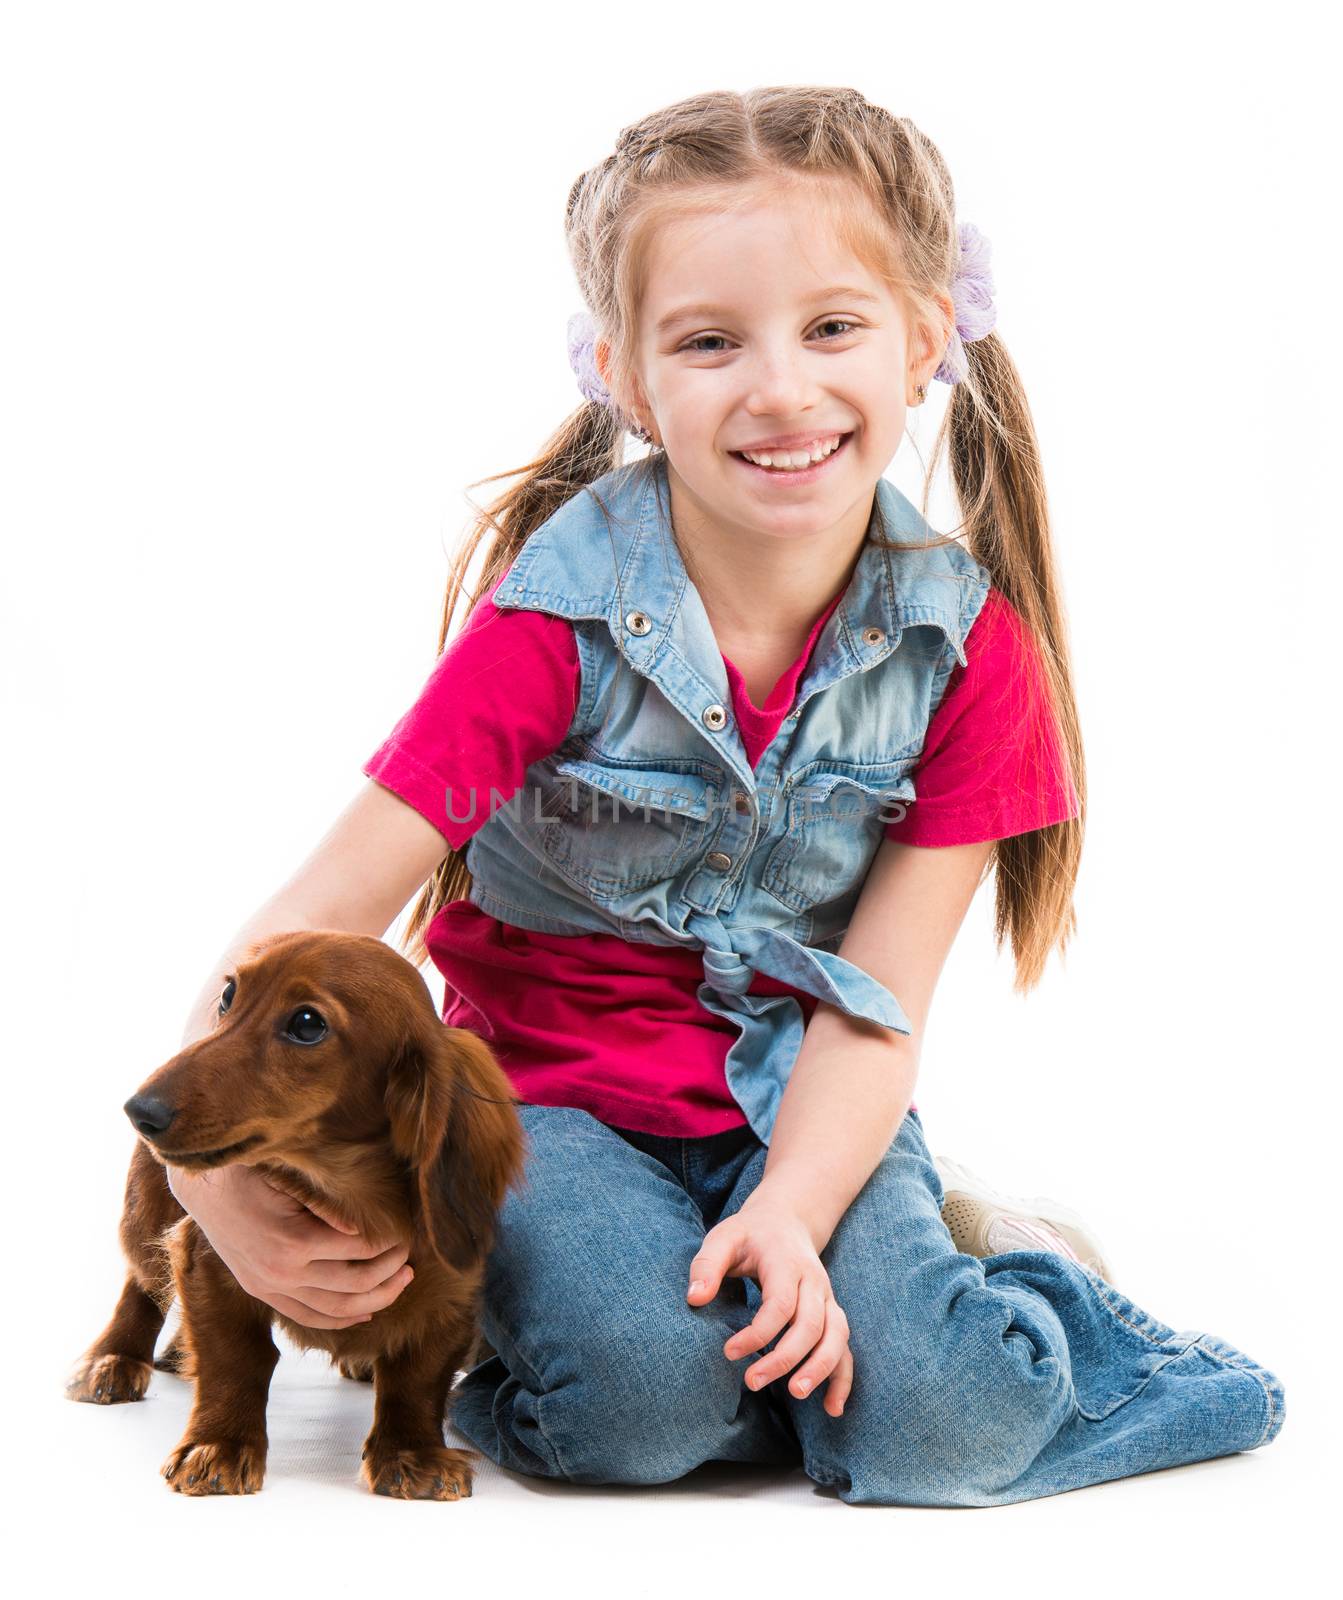 little girl playing with a dog breed dachshund on white background